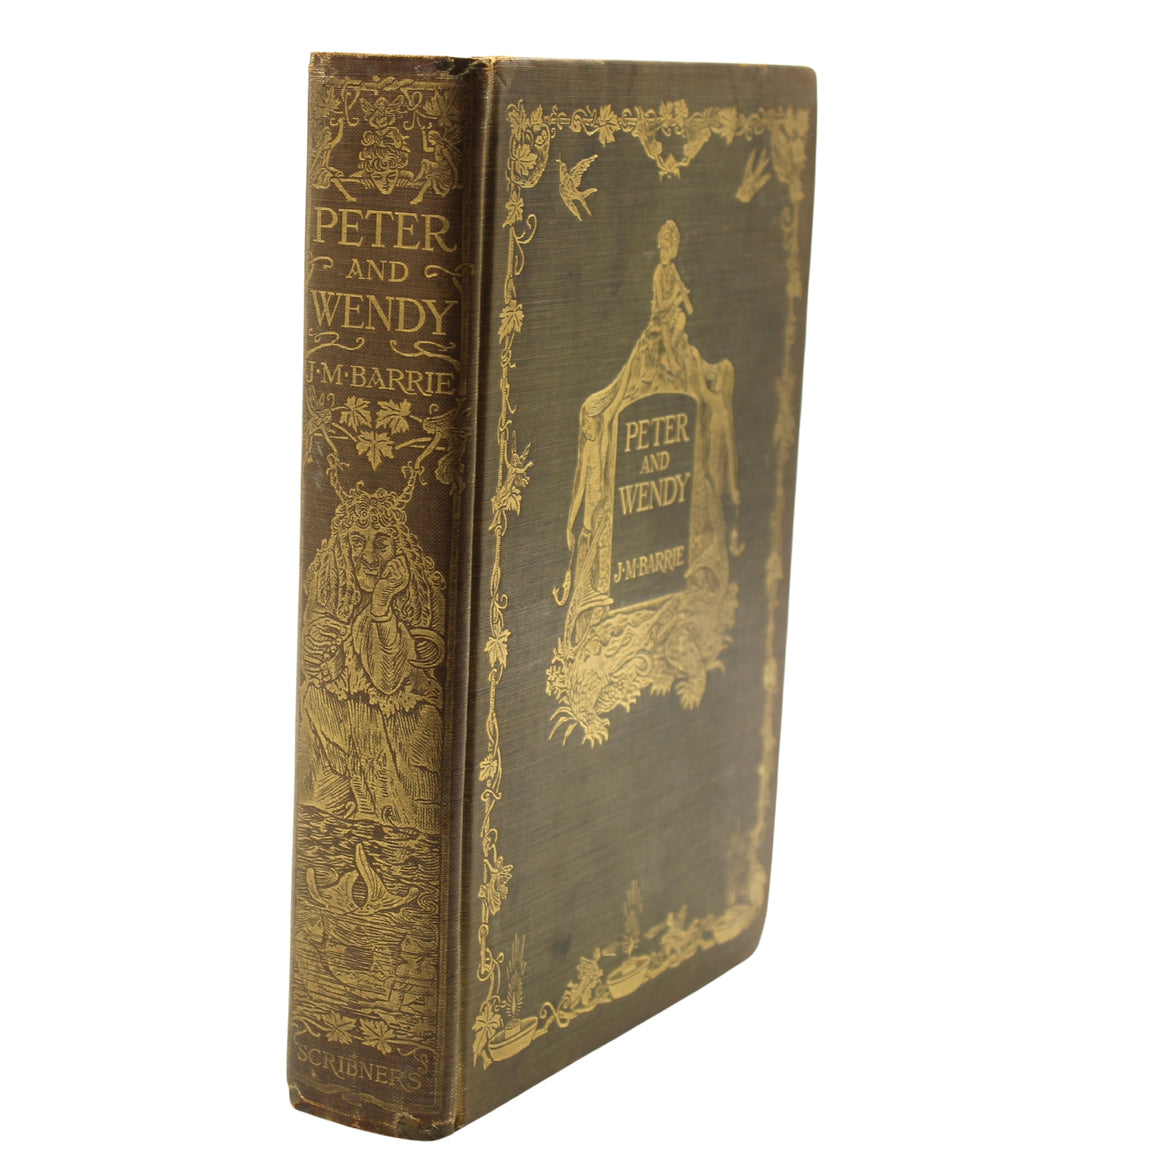 Peter and Wendy by James M. Barrie, First American Trade Edition, 1911